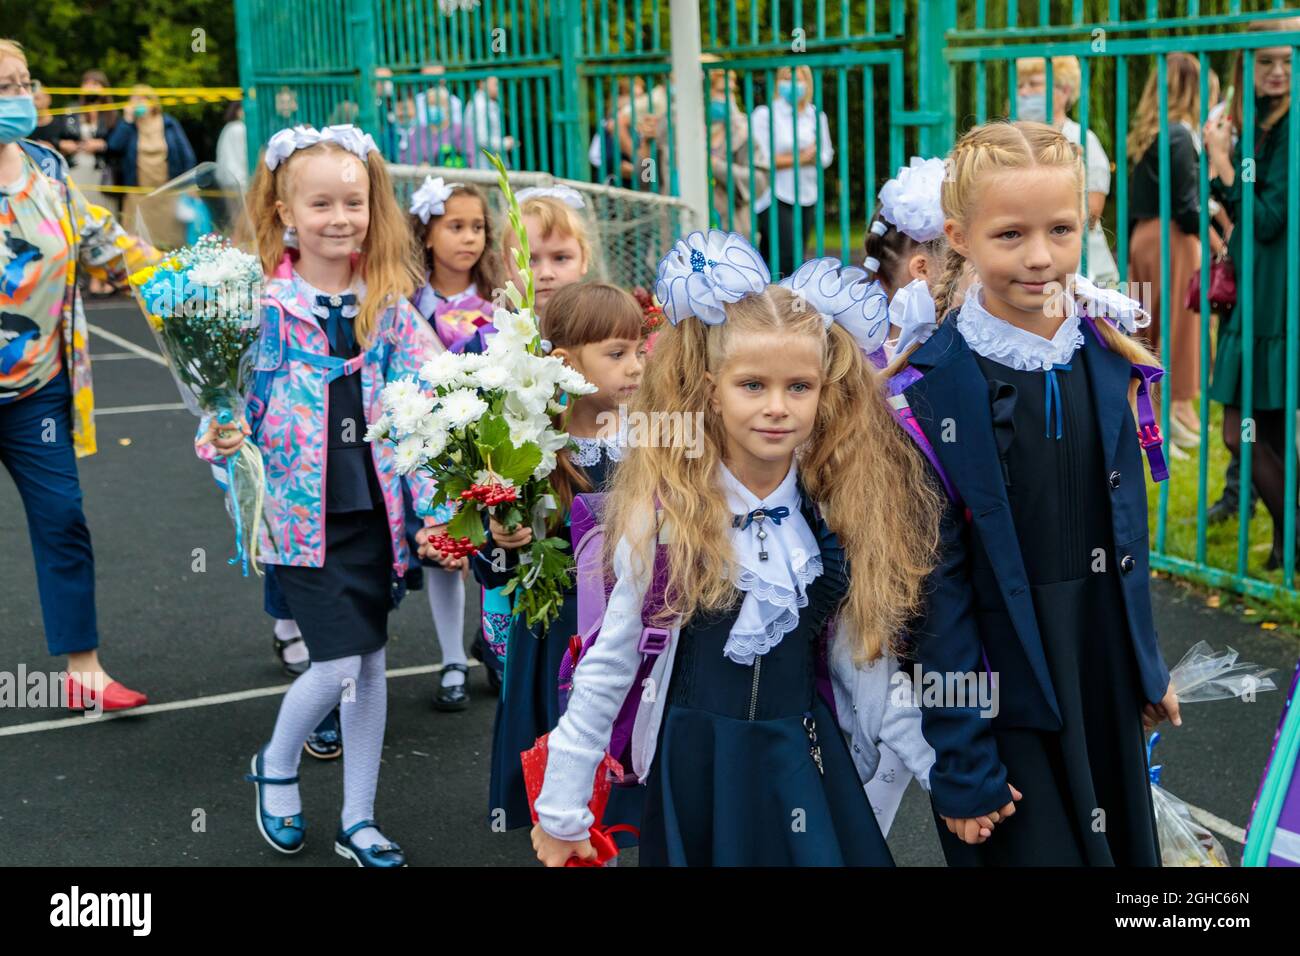 First graders walk with bouquets on September 1. Children go to school, first grade with flowers. School education concept. Moscow, Russia, September Stock Photo